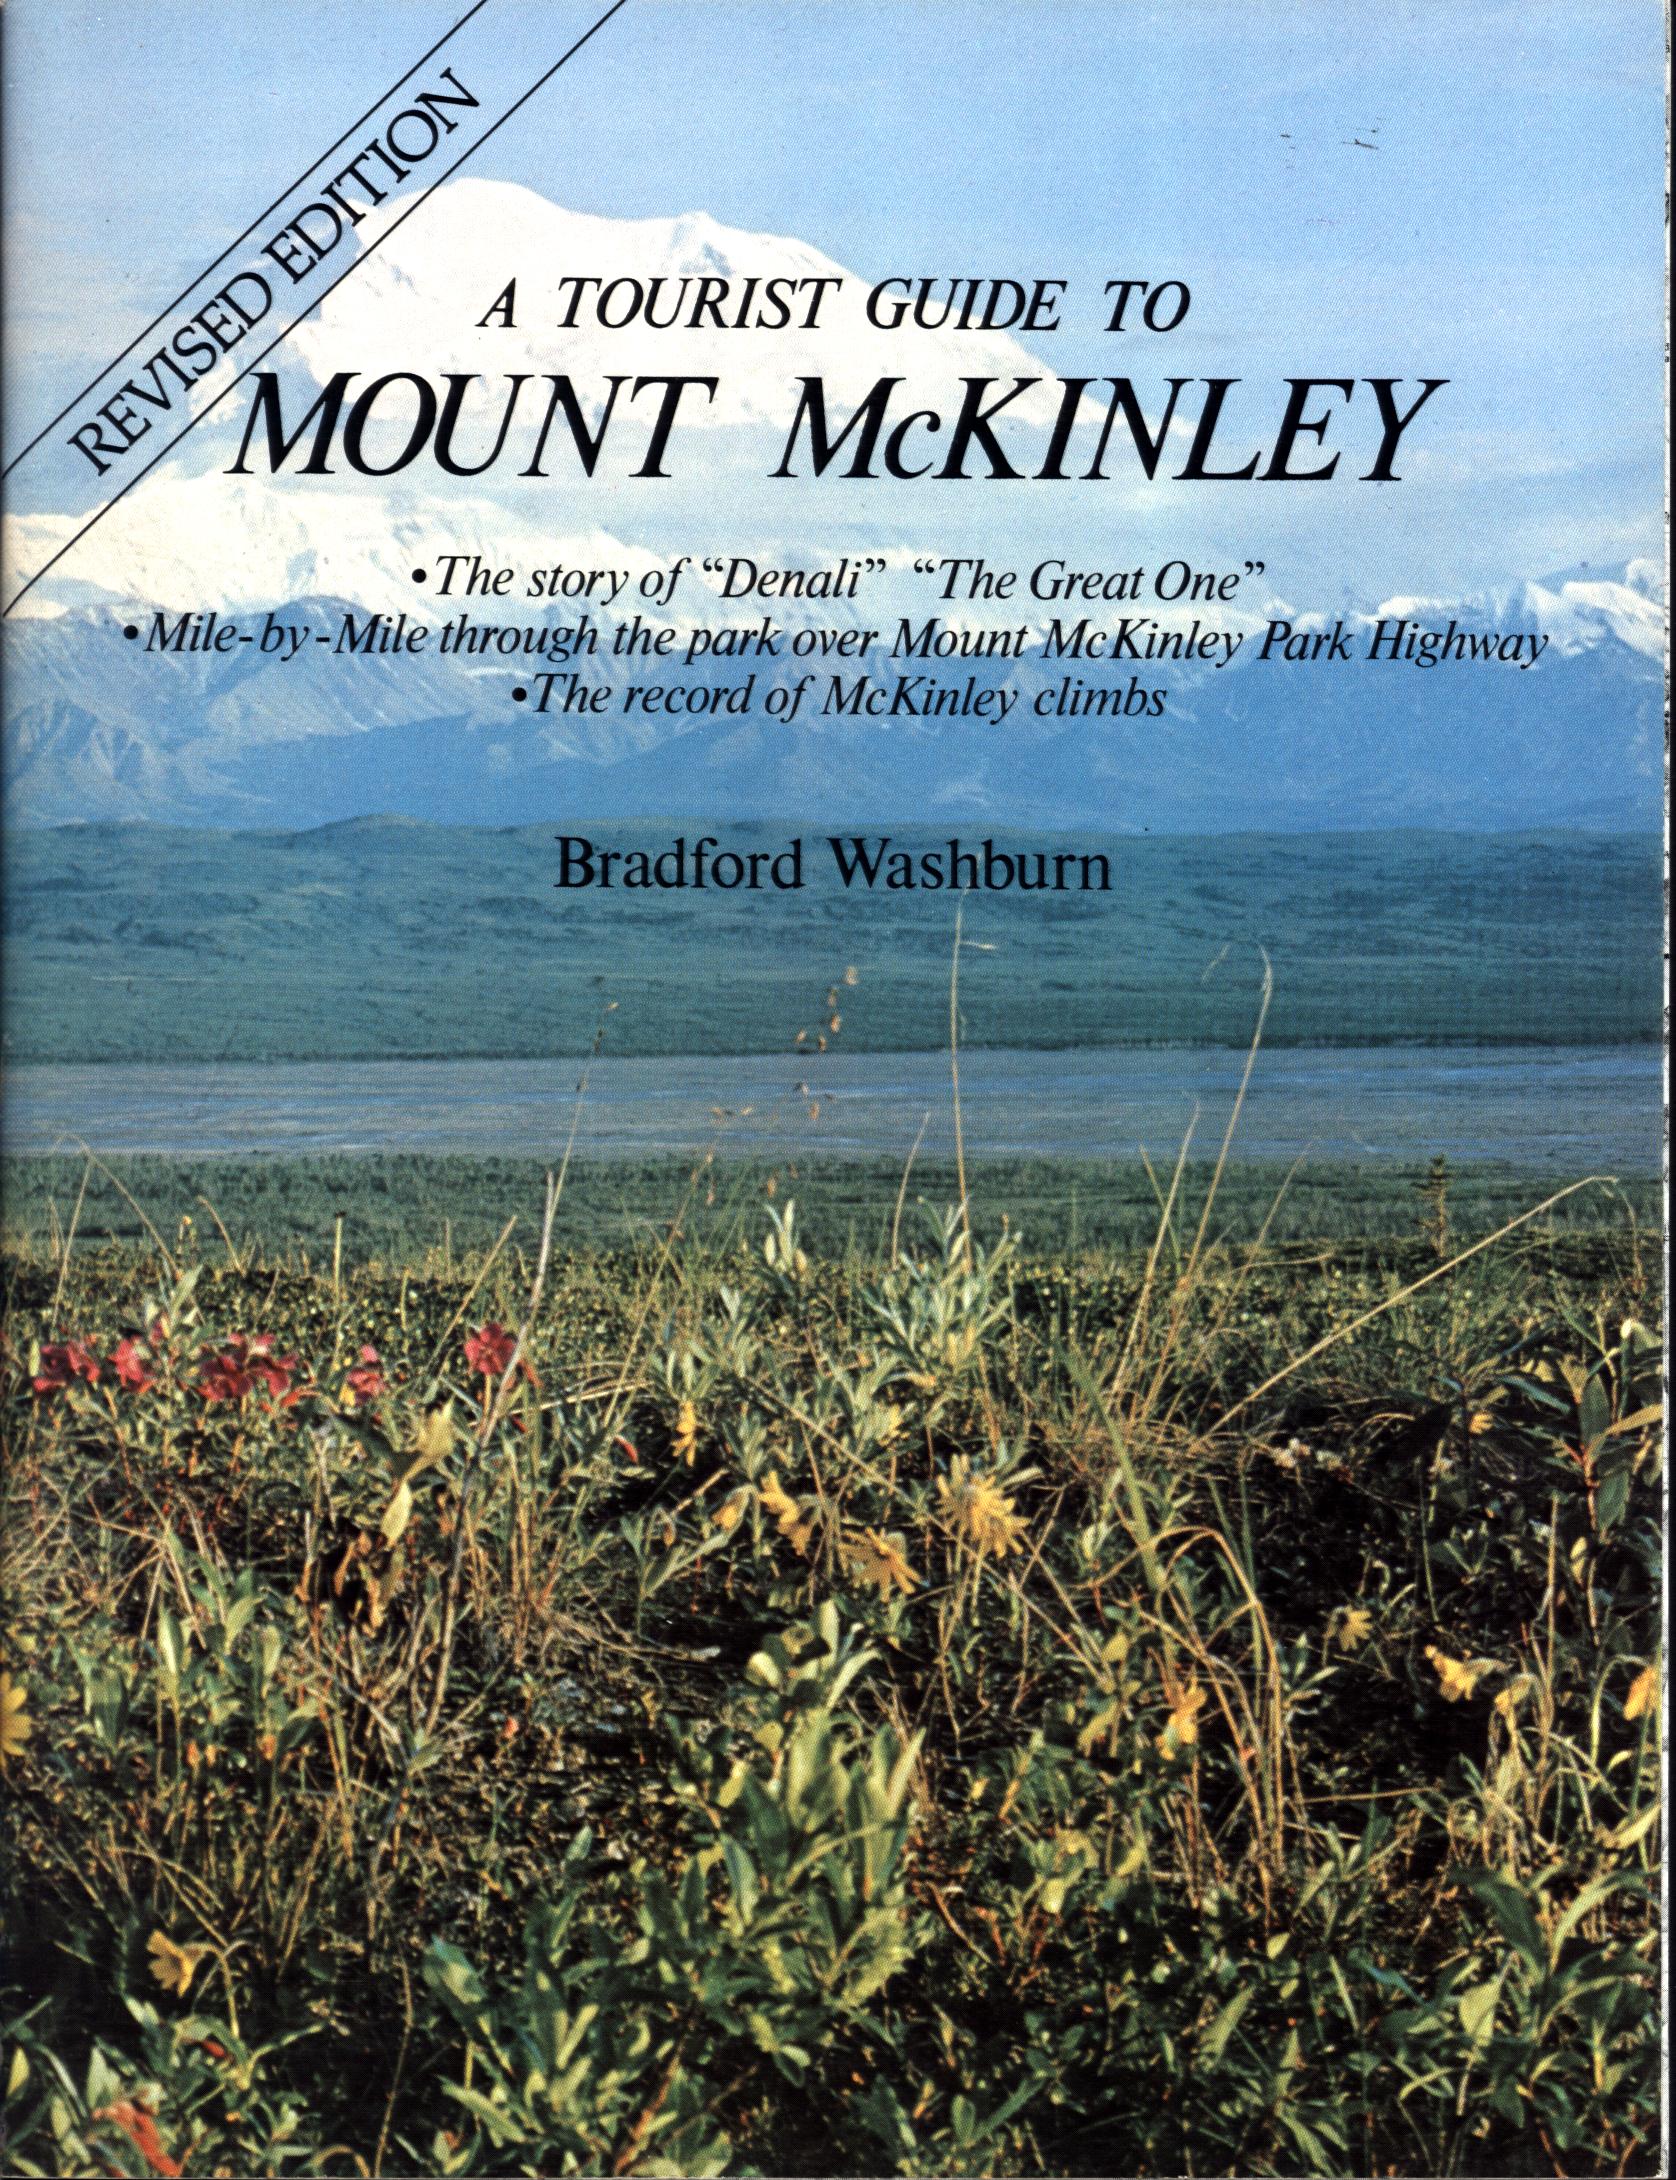 A TOURIST GUIDE TO MOUNT McKINLEY. 